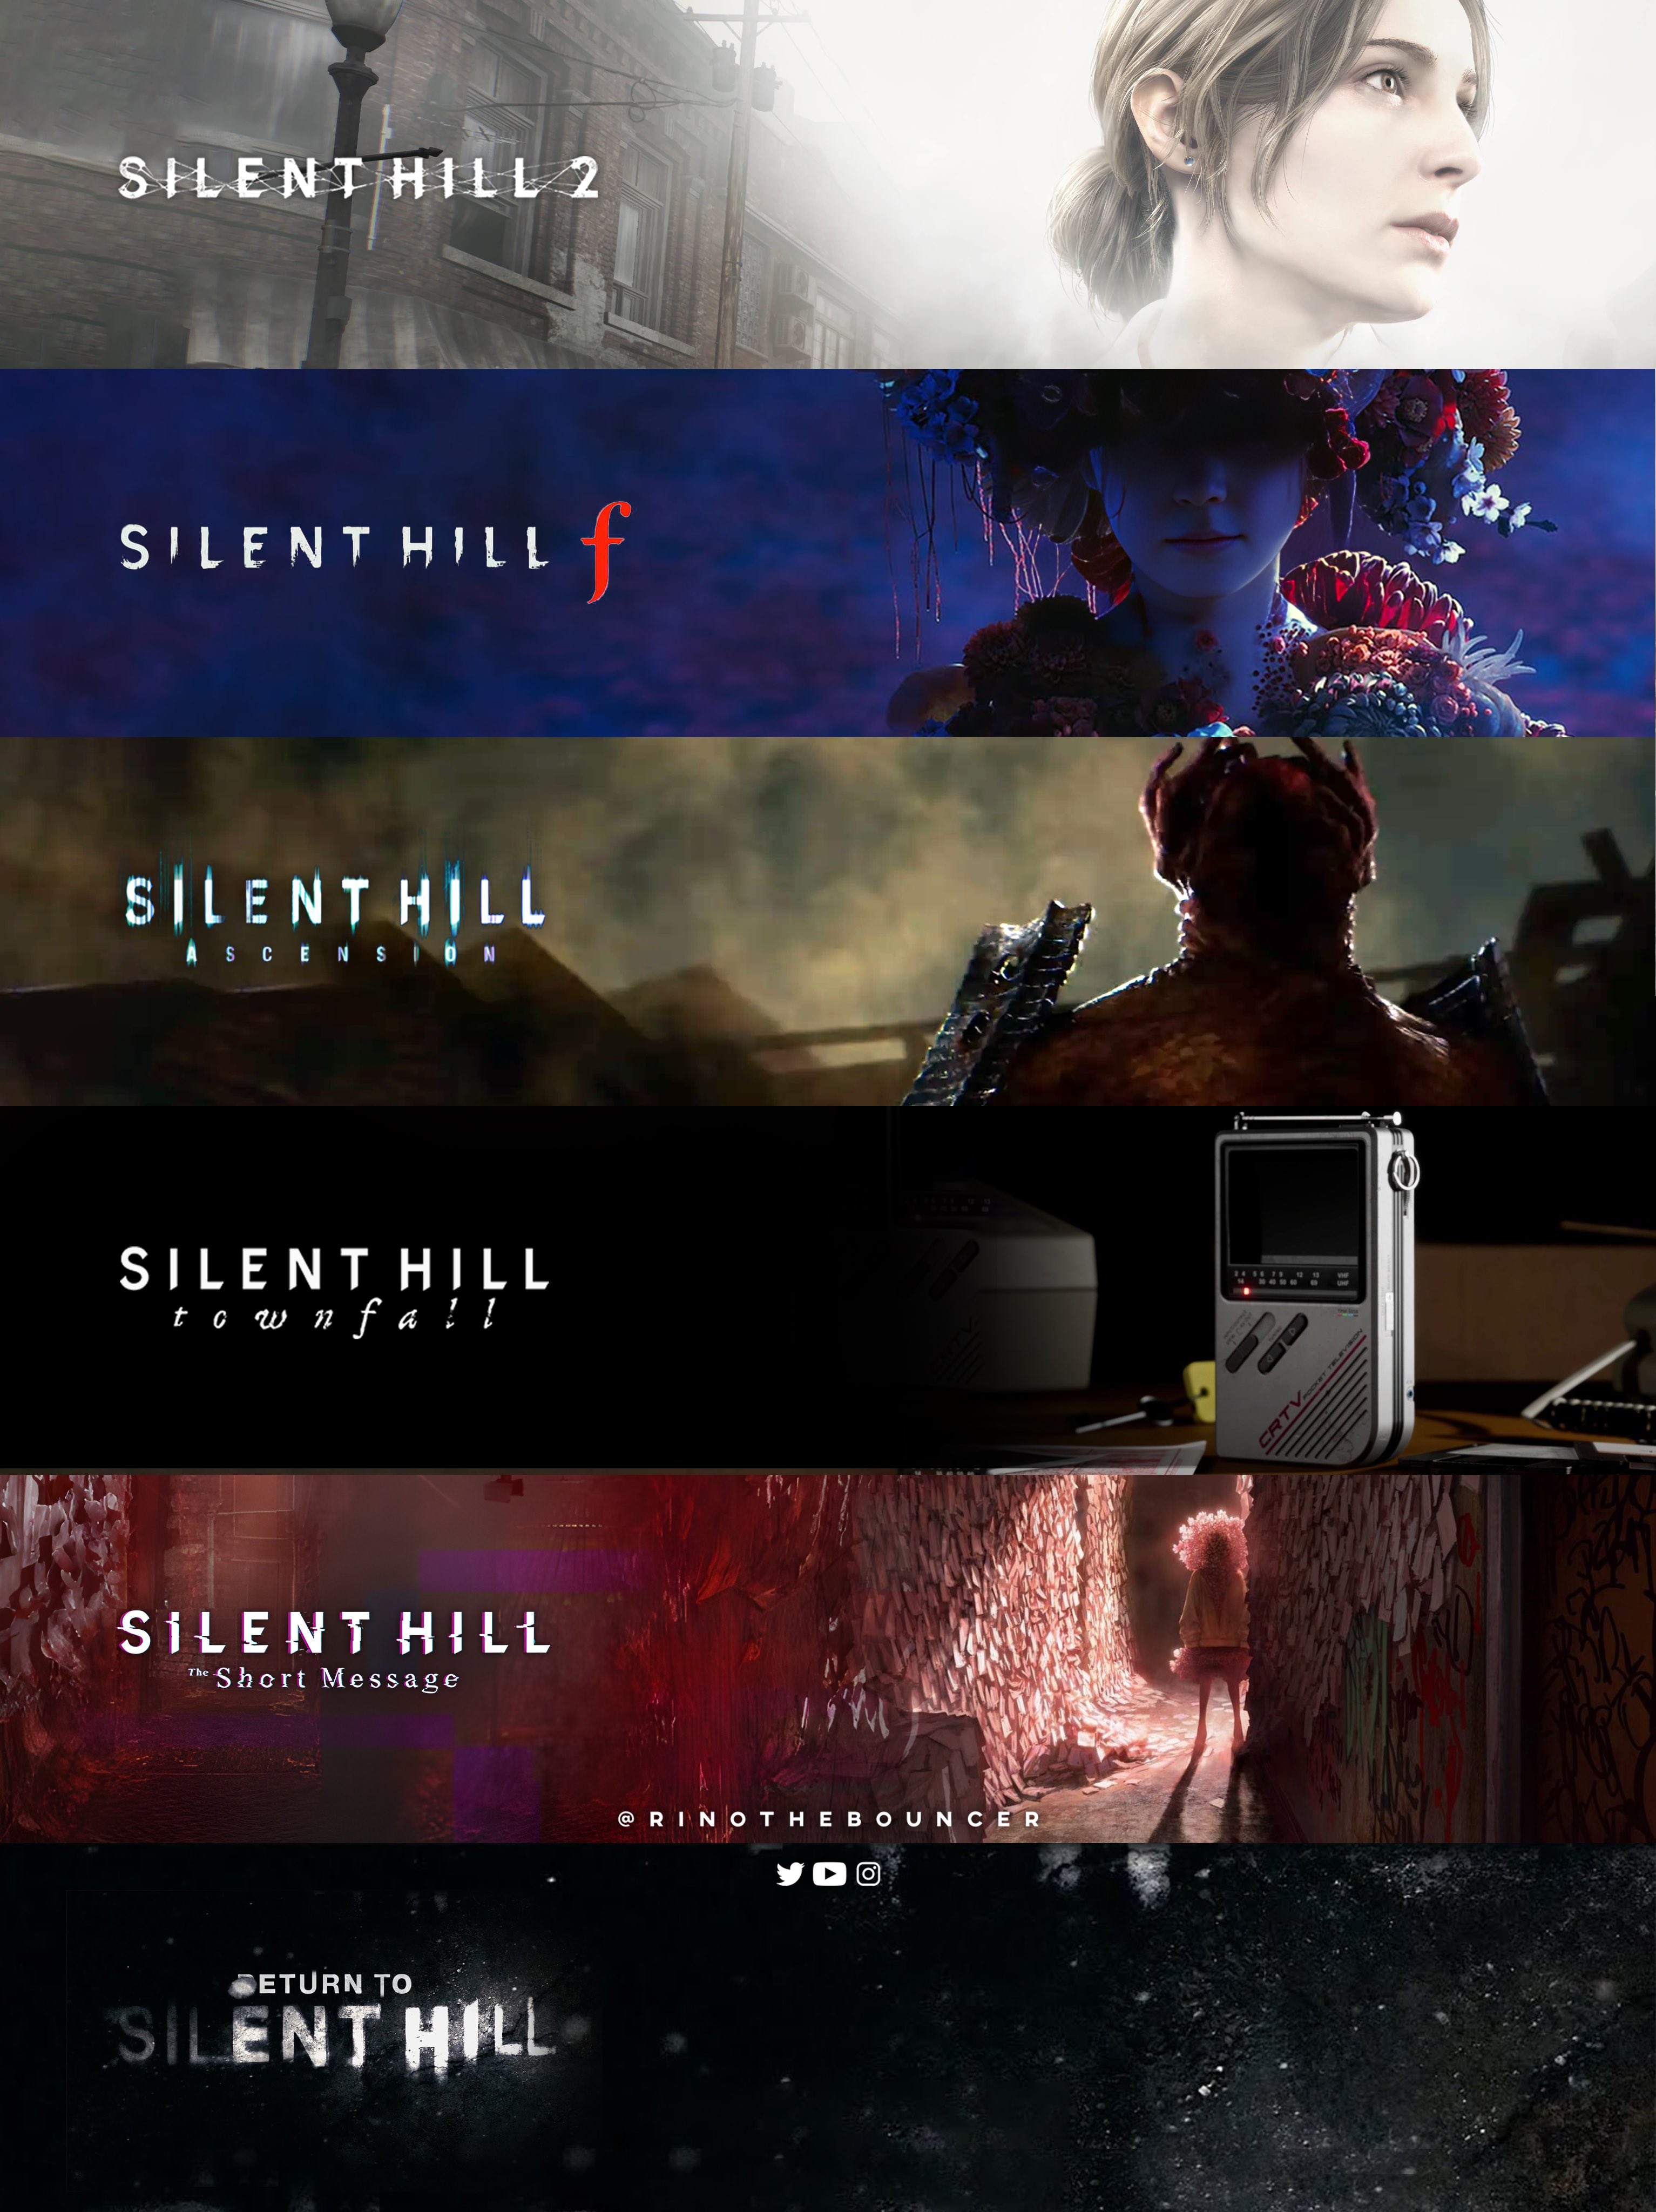 Silent Hill: Ascension announced in new trailer